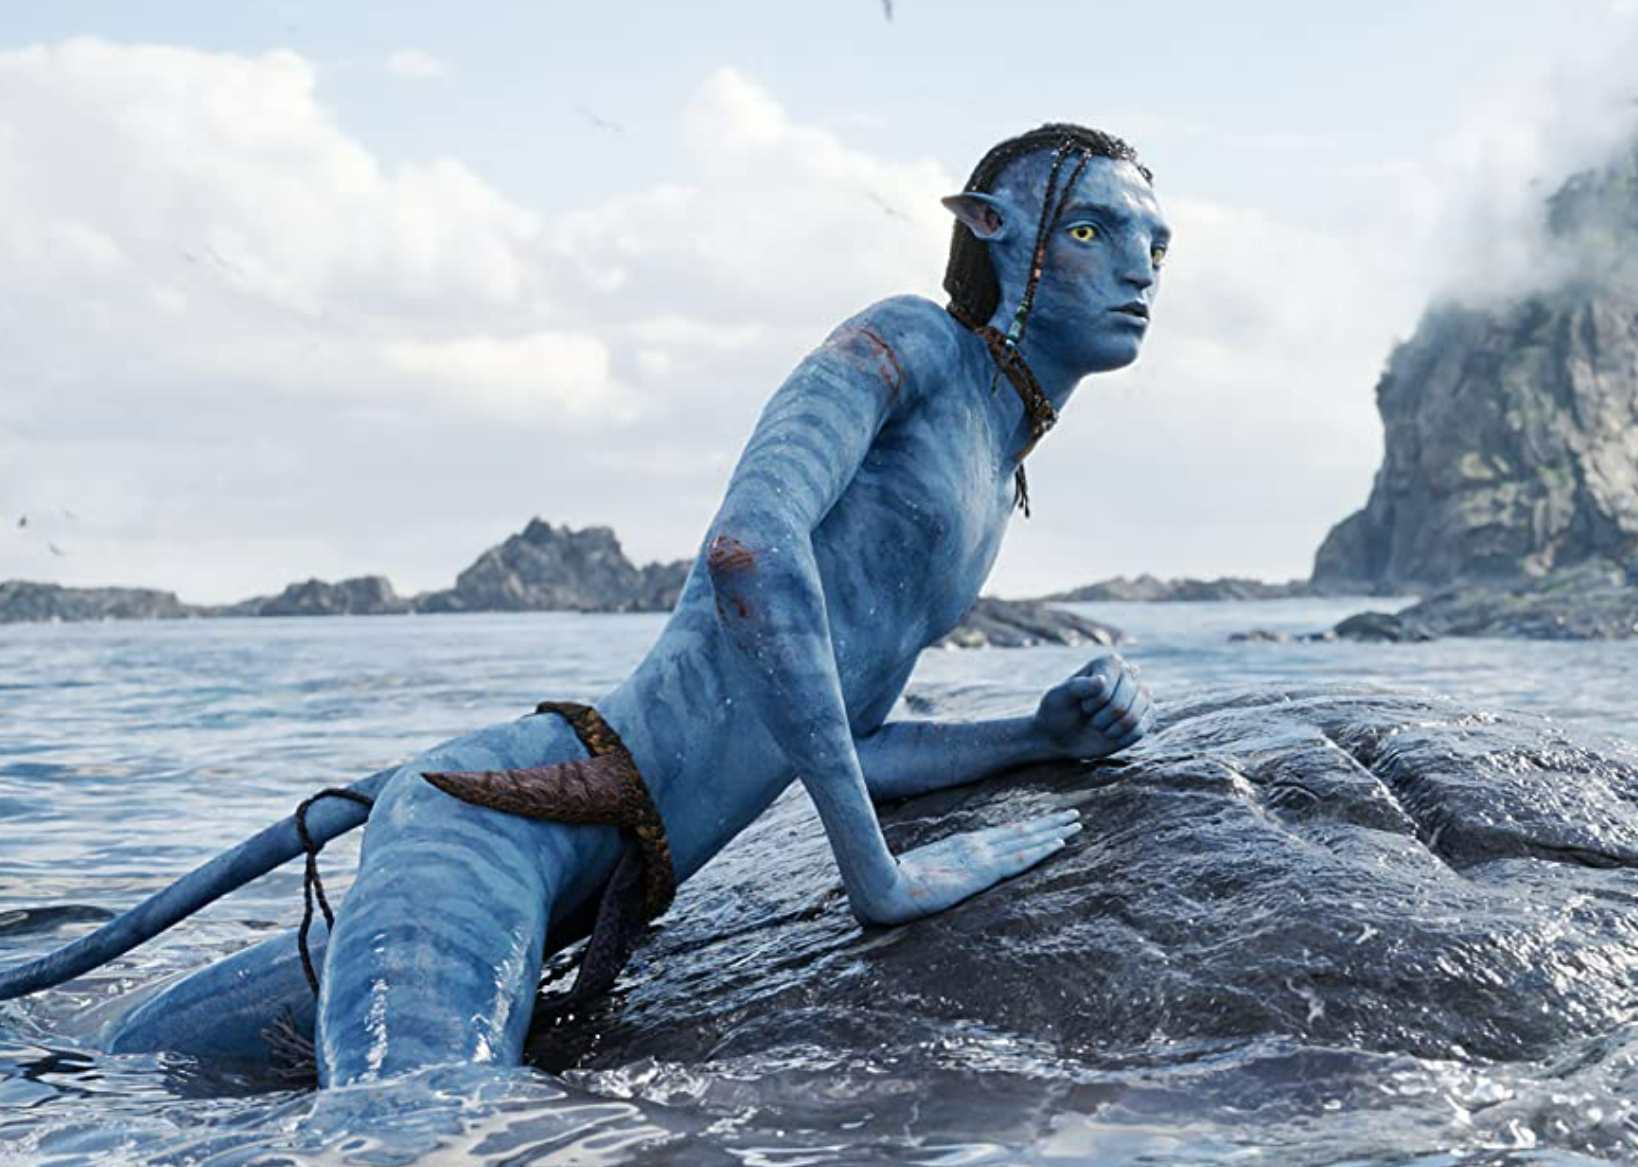 Britain Dalton in a scene from "Avatar: The Way of Water".